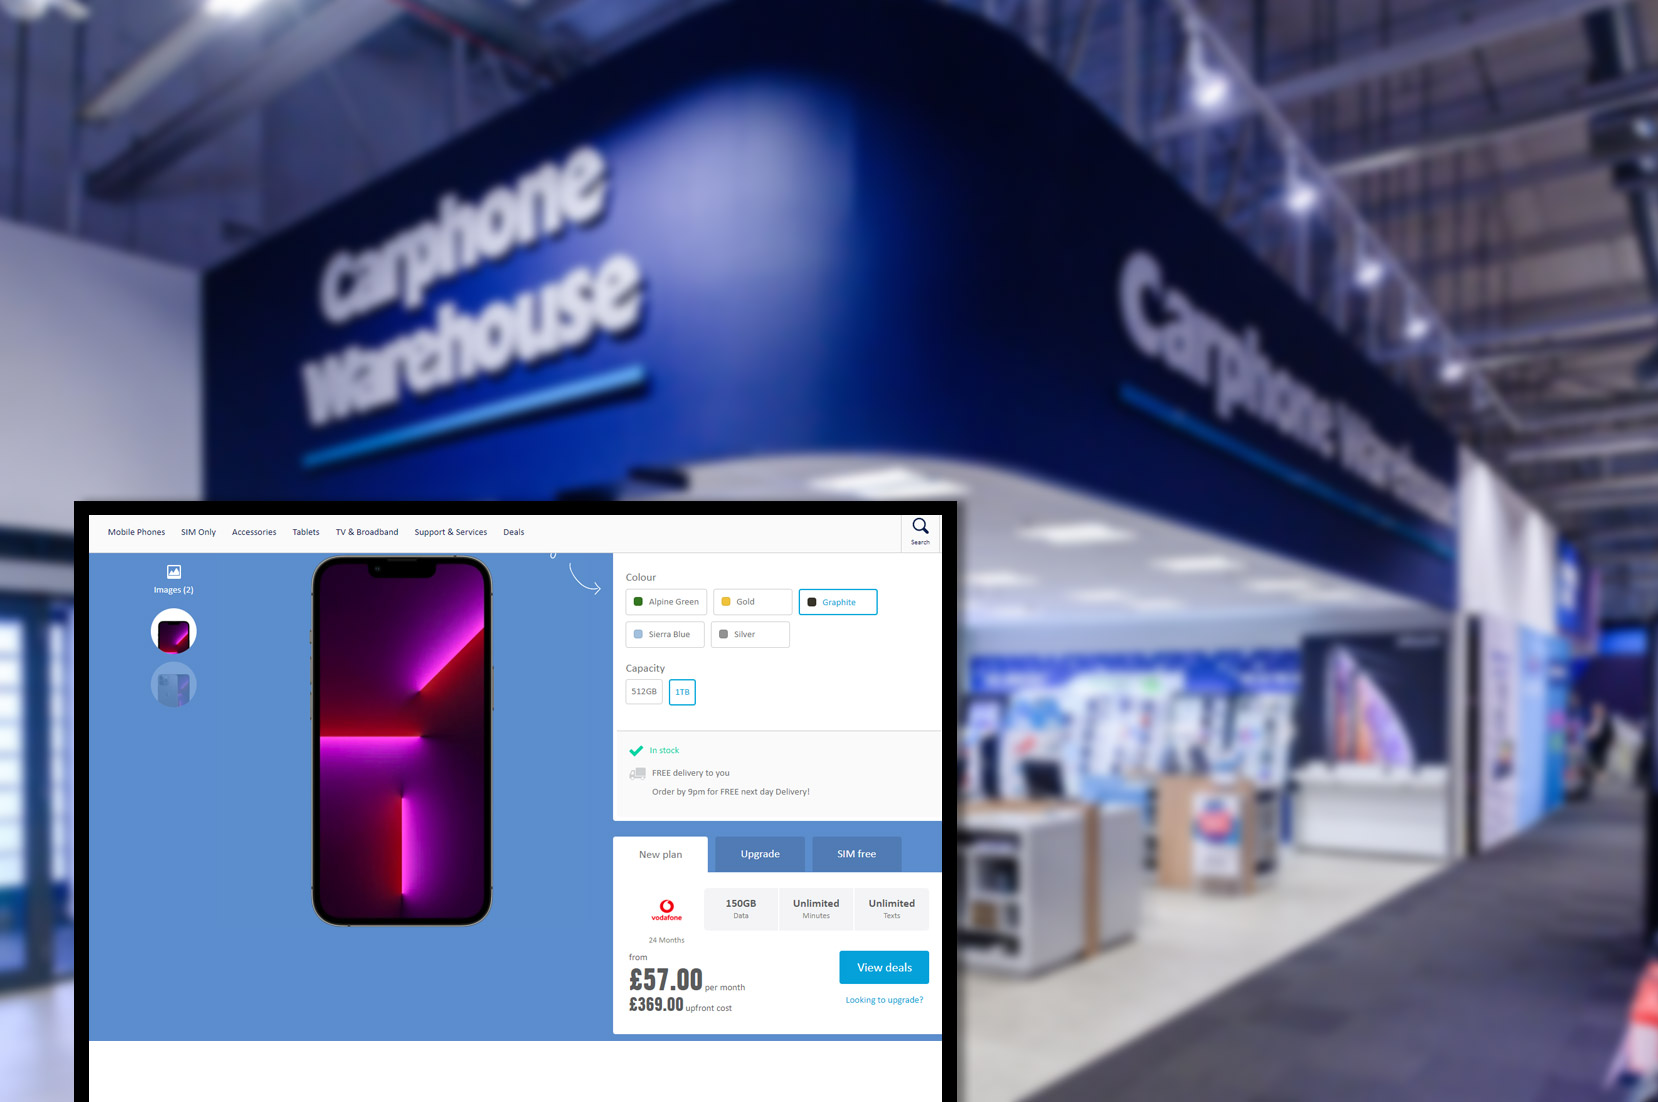 carphonewarehouse-comproduct-pricing-information-and-image-scraping-services